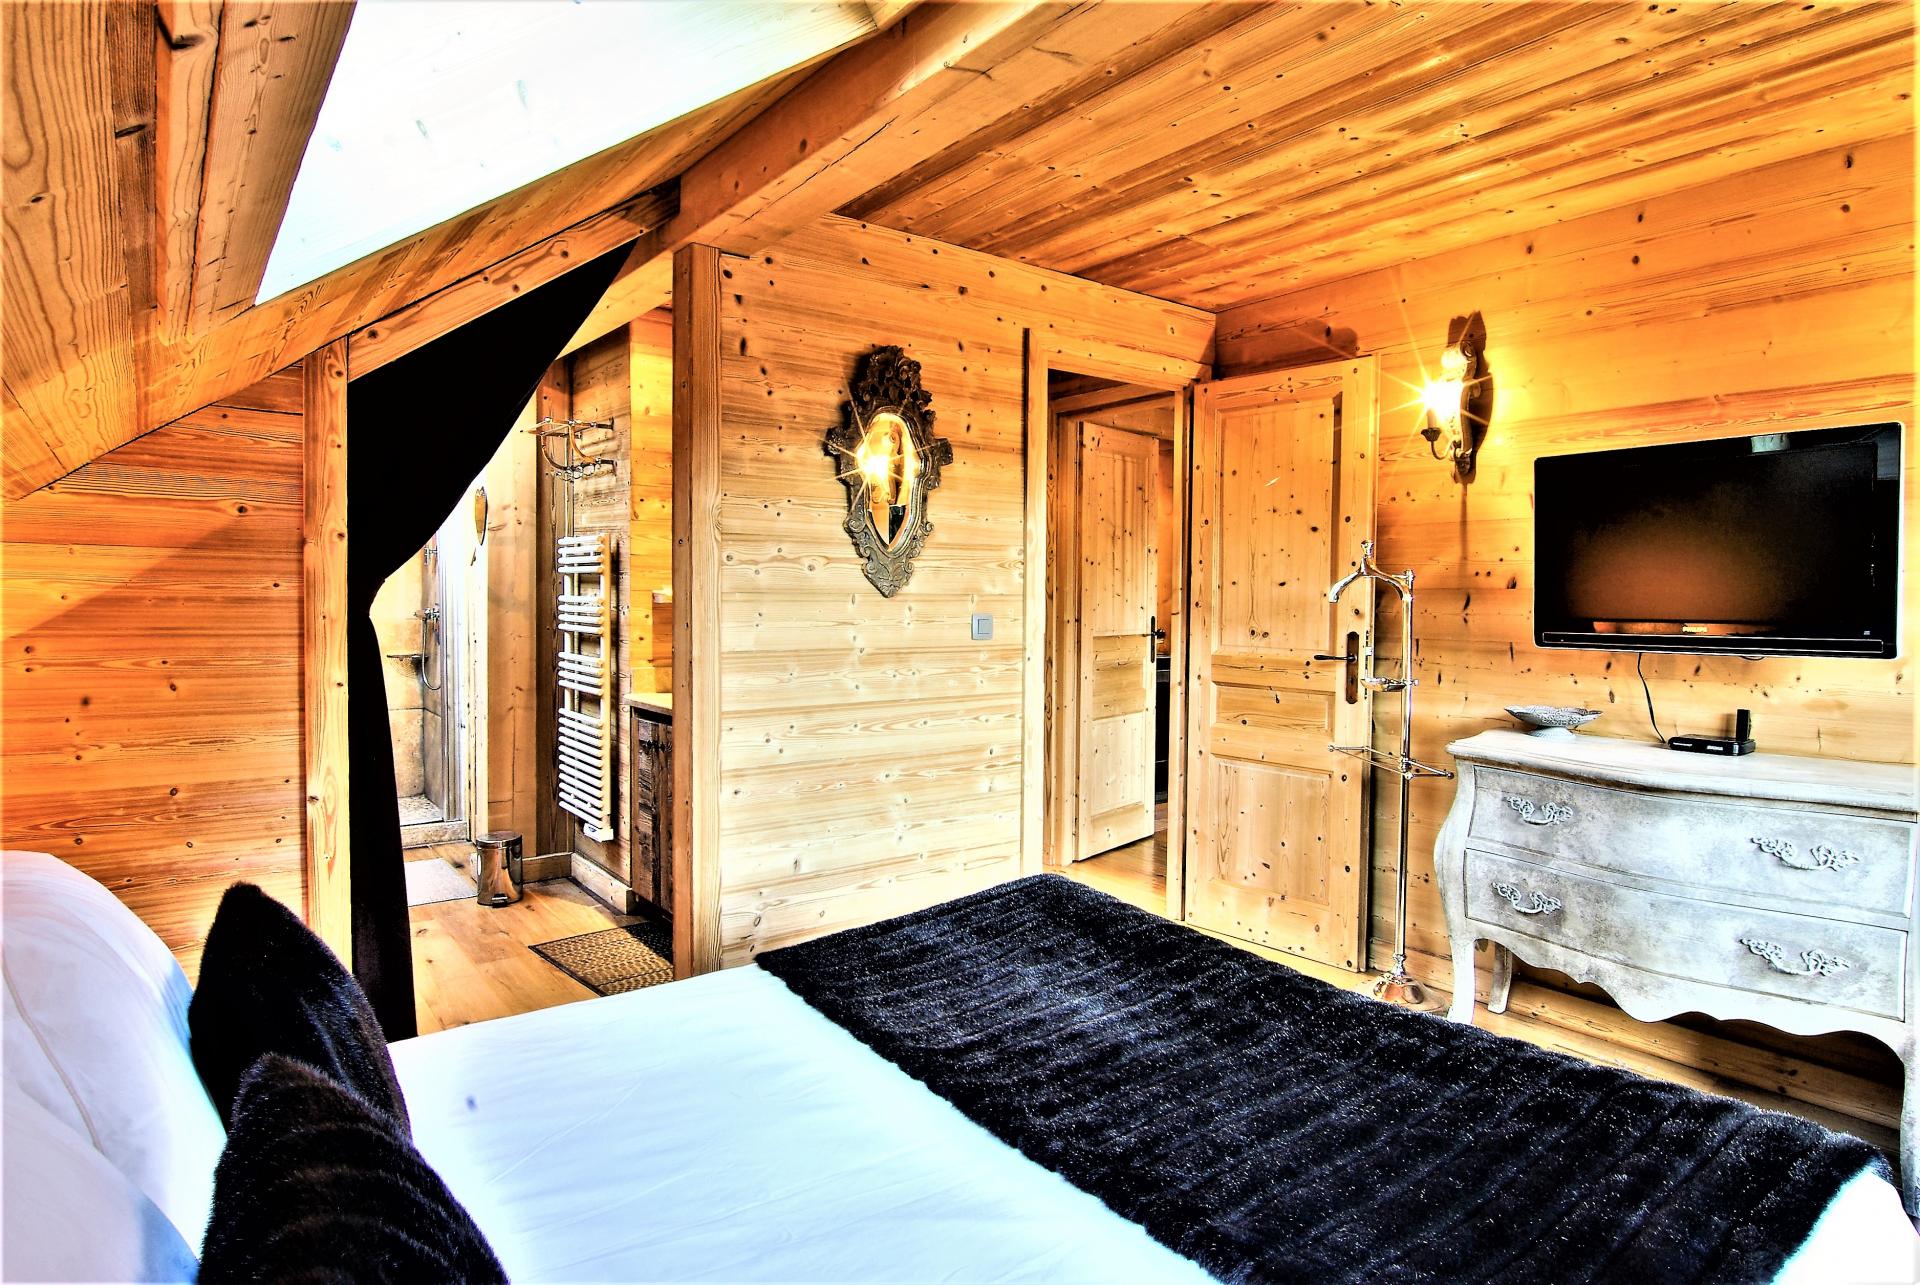 REFINED DECORATION FOR THIS CHALET